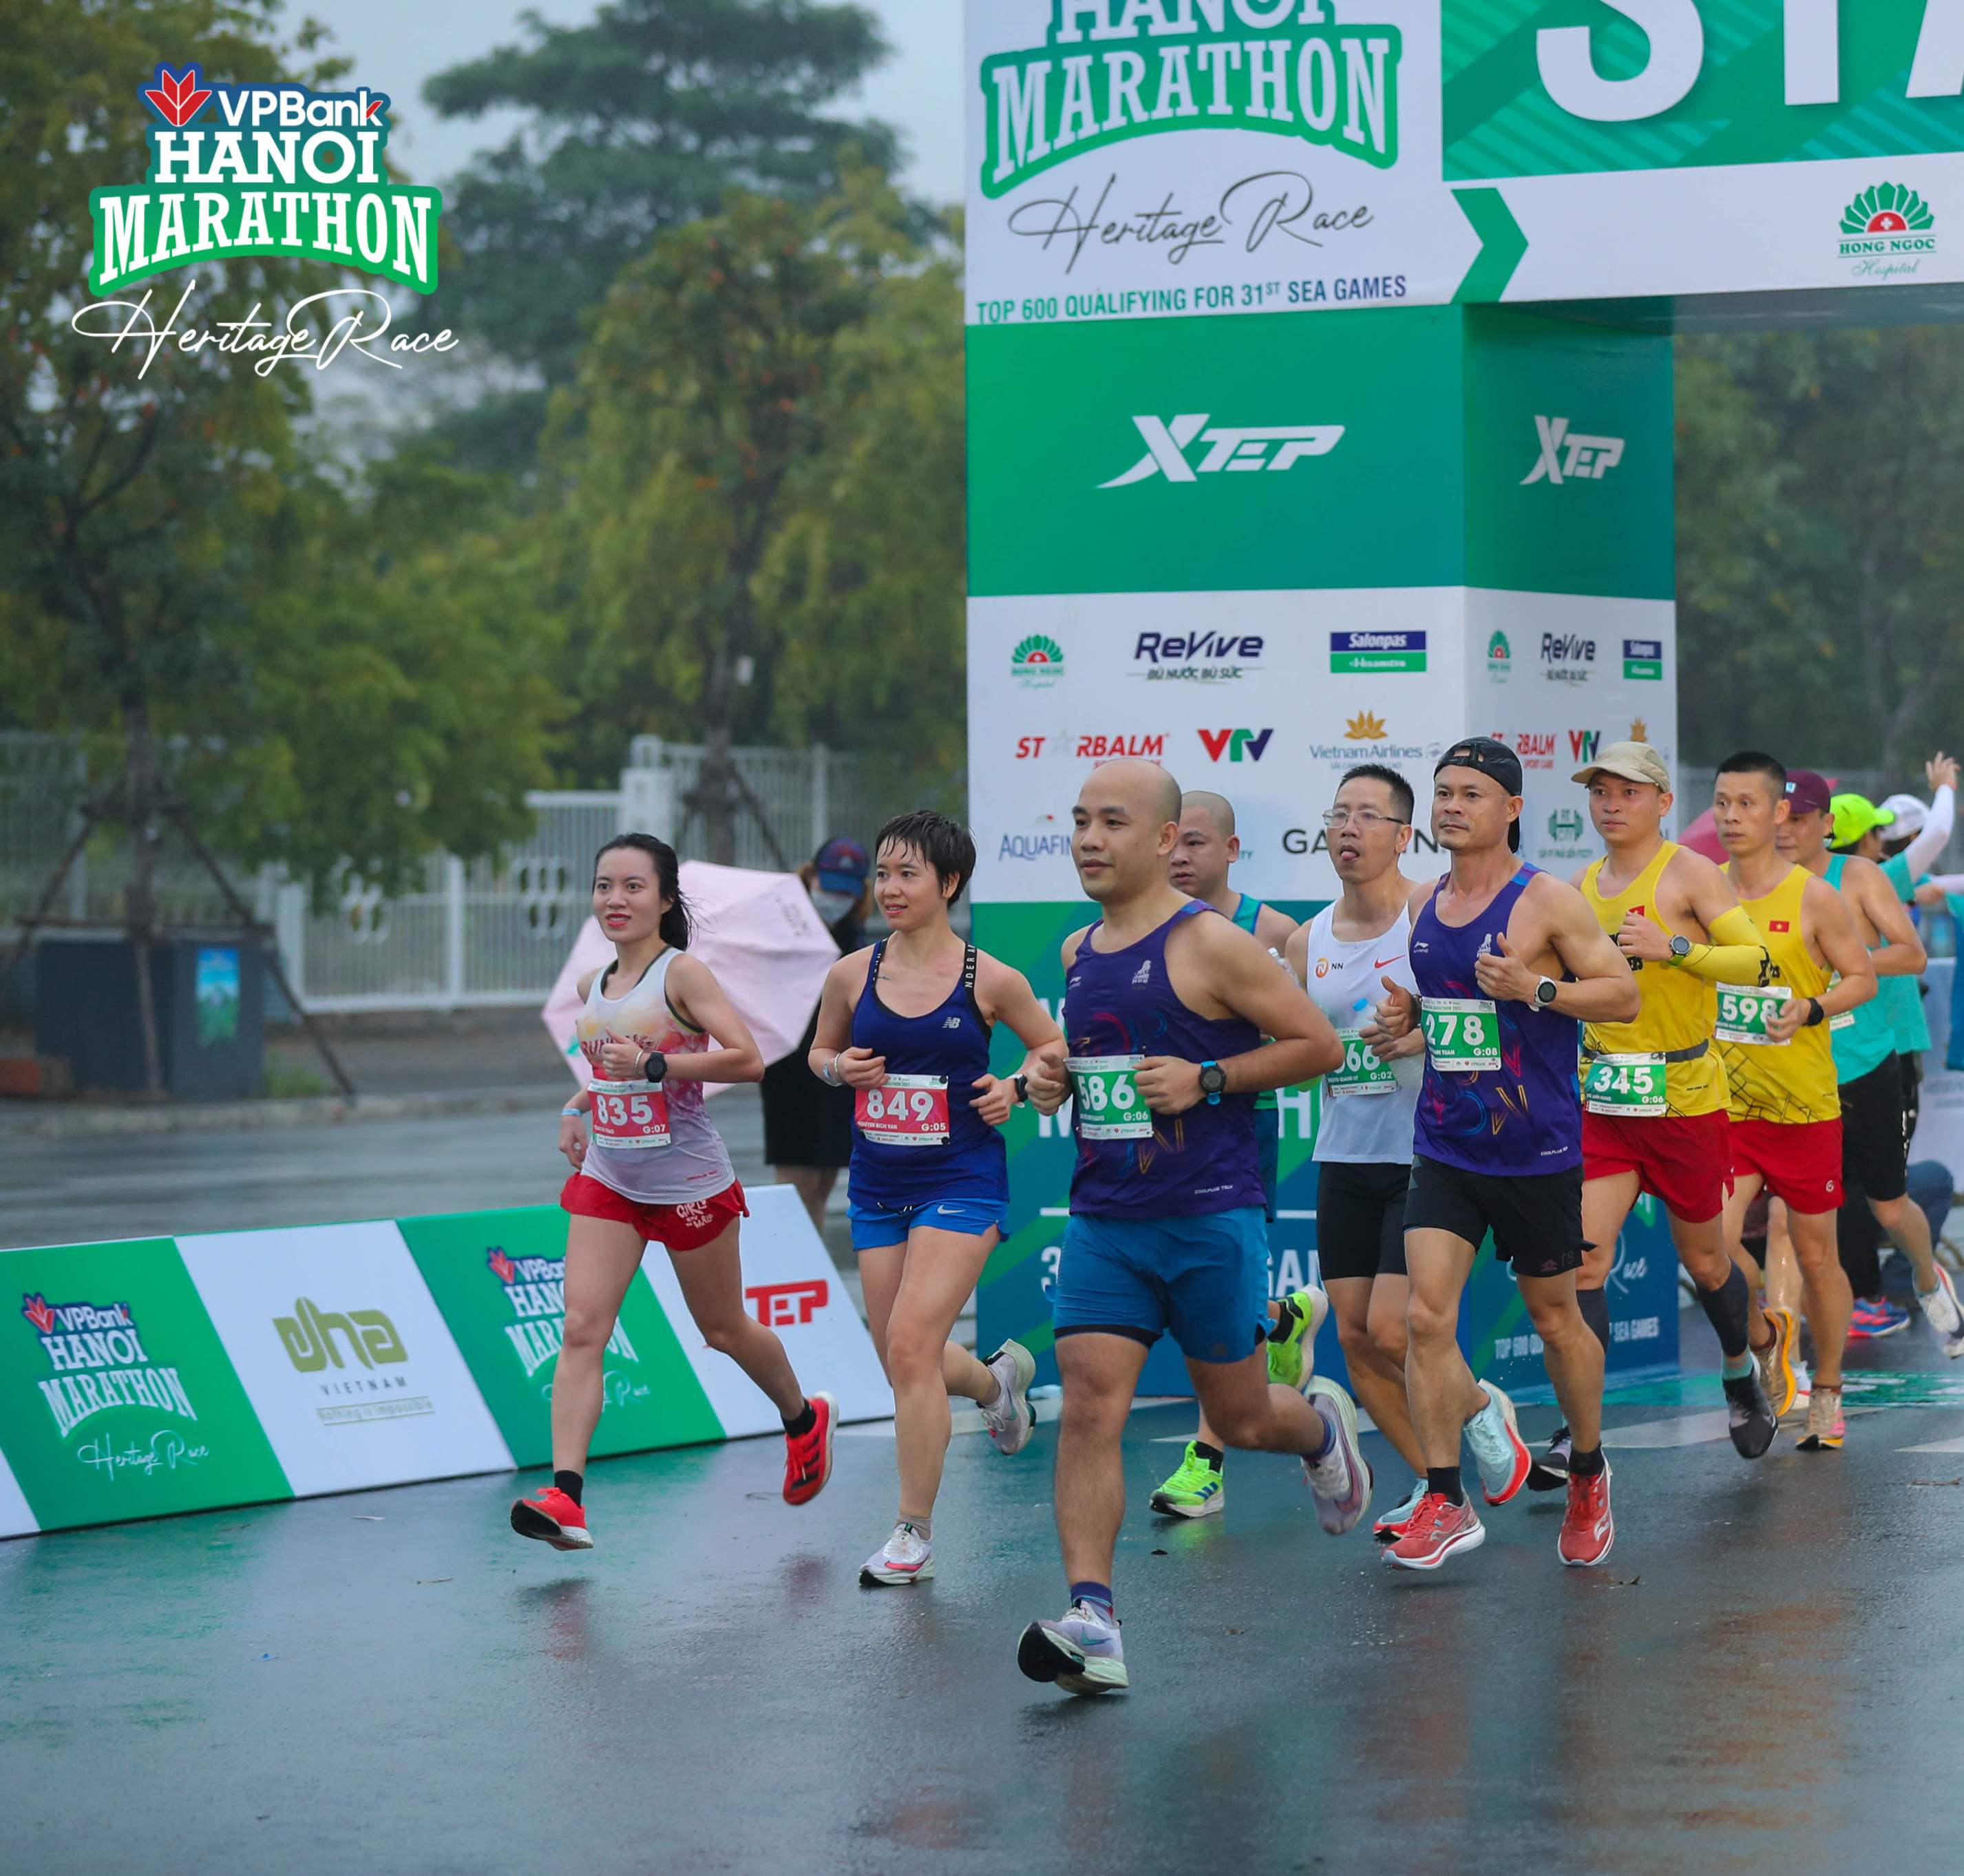 NEWS RELEASE: Successful Test Of Marathon Track For 31st SEA Games & Final Results